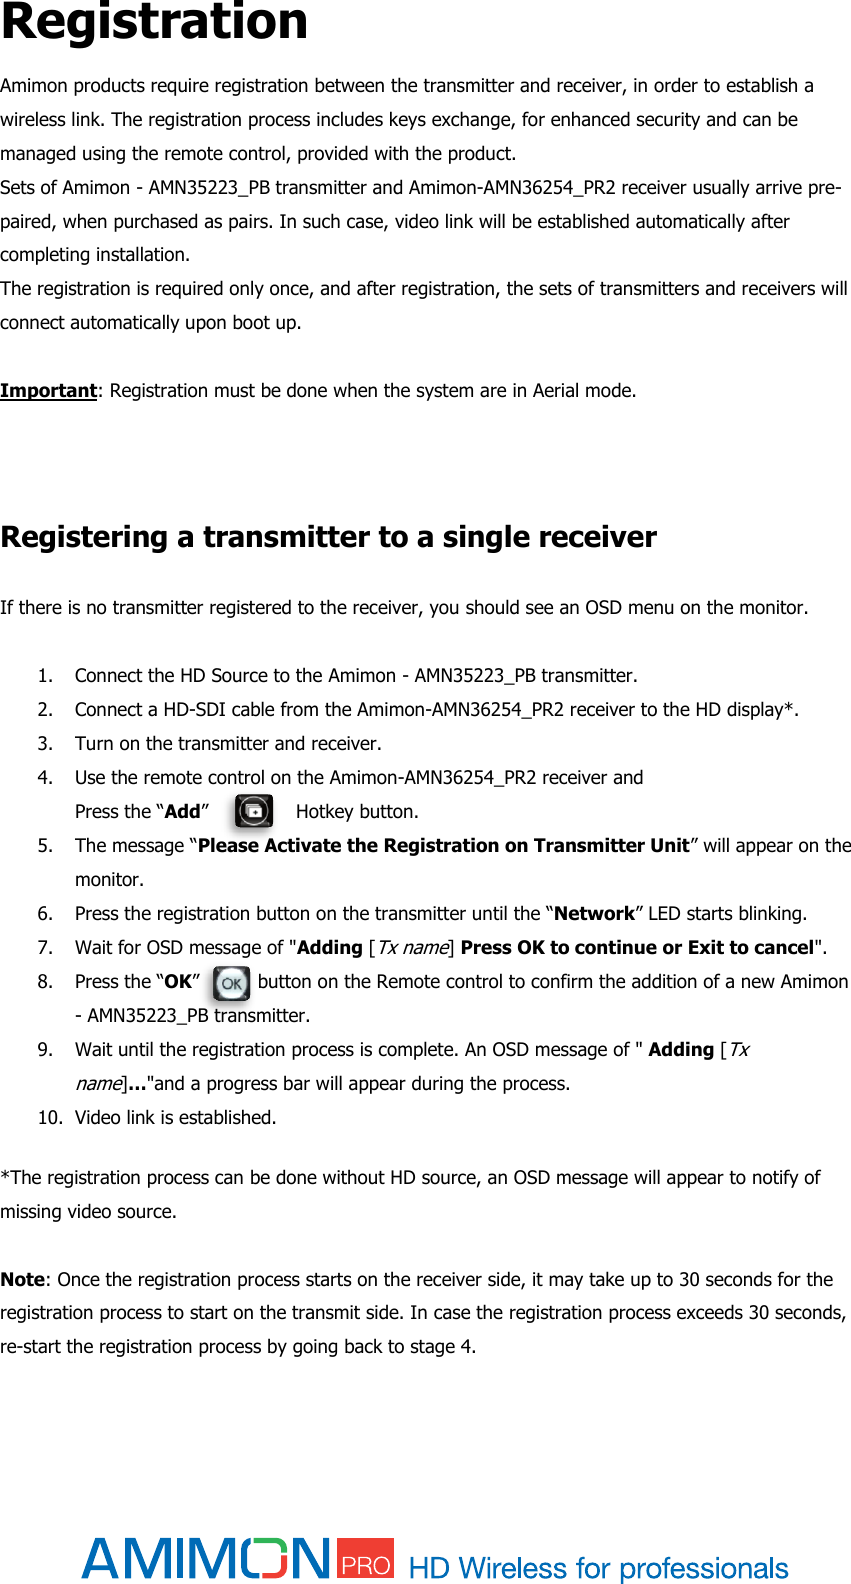  Registration Amimon products require registration between the transmitter and receiver, in order to establish a wireless link. The registration process includes keys exchange, for enhanced security and can be managed using the remote control, provided with the product. Sets of Amimon - AMN35223_PB transmitter and Amimon-AMN36254_PR2 receiver usually arrive pre-paired, when purchased as pairs. In such case, video link will be established automatically after completing installation. The registration is required only once, and after registration, the sets of transmitters and receivers will connect automatically upon boot up.  Important: Registration must be done when the system are in Aerial mode.   Registering a transmitter to a single receiver  If there is no transmitter registered to the receiver, you should see an OSD menu on the monitor.  1. Connect the HD Source to the Amimon - AMN35223_PB transmitter. 2. Connect a HD-SDI cable from the Amimon-AMN36254_PR2 receiver to the HD display*. 3. Turn on the transmitter and receiver. 4. Use the remote control on the Amimon-AMN36254_PR2 receiver and  Press the “Add”               Hotkey button.  5. The message “Please Activate the Registration on Transmitter Unit” will appear on the monitor. 6. Press the registration button on the transmitter until the “Network” LED starts blinking. 7. Wait for OSD message of &quot;Adding [Tx name] Press OK to continue or Exit to cancel&quot;.  8. Press the “OK”          button on the Remote control to confirm the addition of a new Amimon - AMN35223_PB transmitter. 9. Wait until the registration process is complete. An OSD message of &quot; Adding [Tx name]…&quot;and a progress bar will appear during the process. 10. Video link is established.  *The registration process can be done without HD source, an OSD message will appear to notify of missing video source.  Note: Once the registration process starts on the receiver side, it may take up to 30 seconds for the registration process to start on the transmit side. In case the registration process exceeds 30 seconds, re-start the registration process by going back to stage 4.     